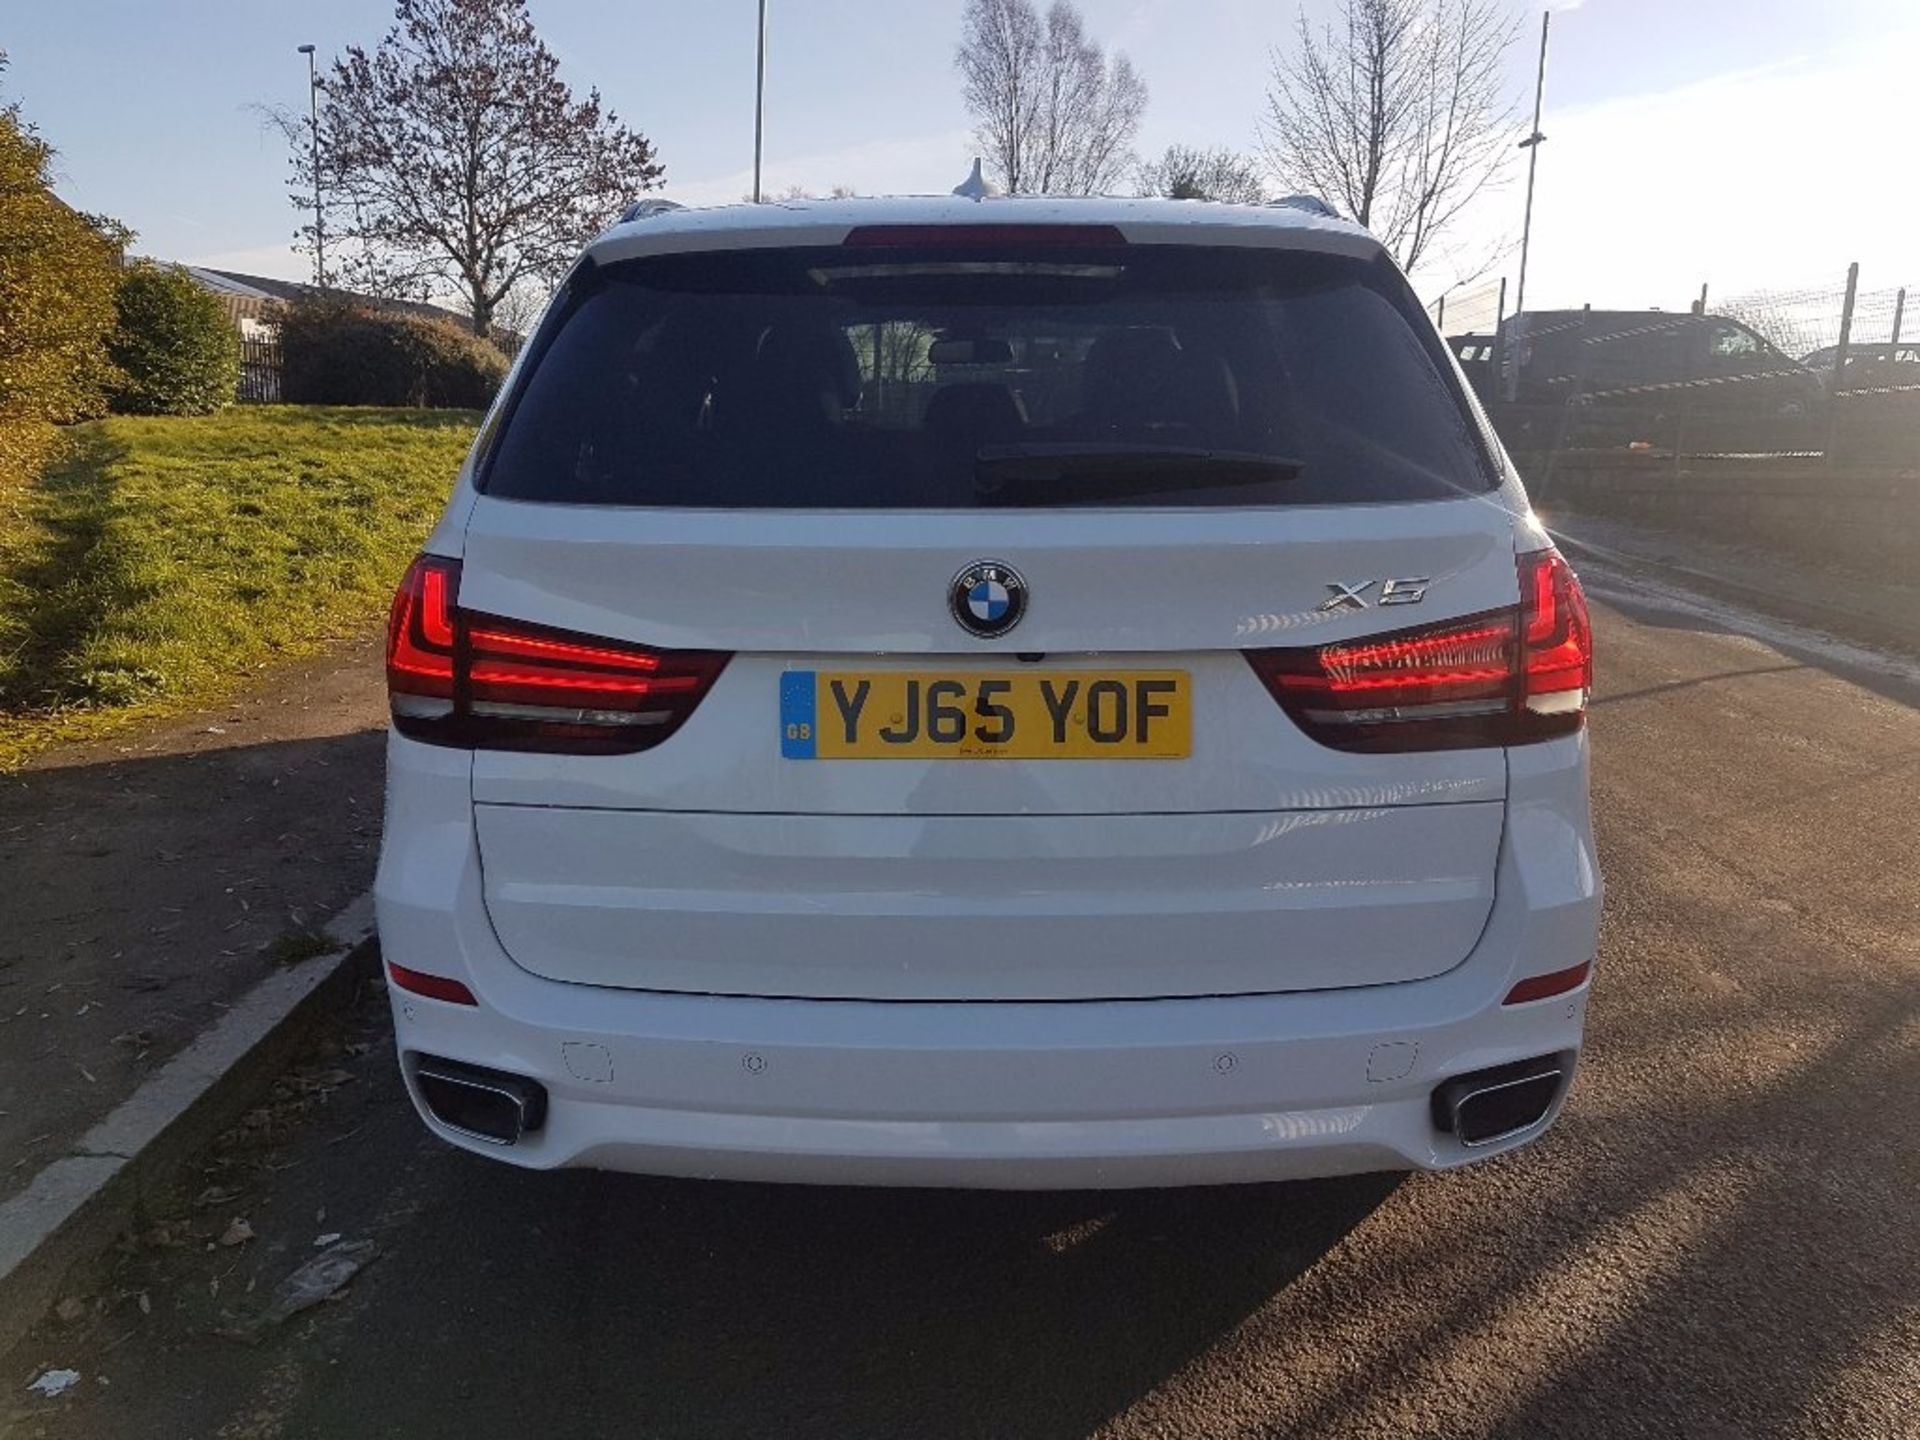 BMW, X5 40D M SPORT STEPTRONIC, 29.09.2015, YJ65 YOF, 3-0 LTR, DIESEL, AUTOMATIC, 5 DOOR SUV, 17,006 - Image 16 of 20